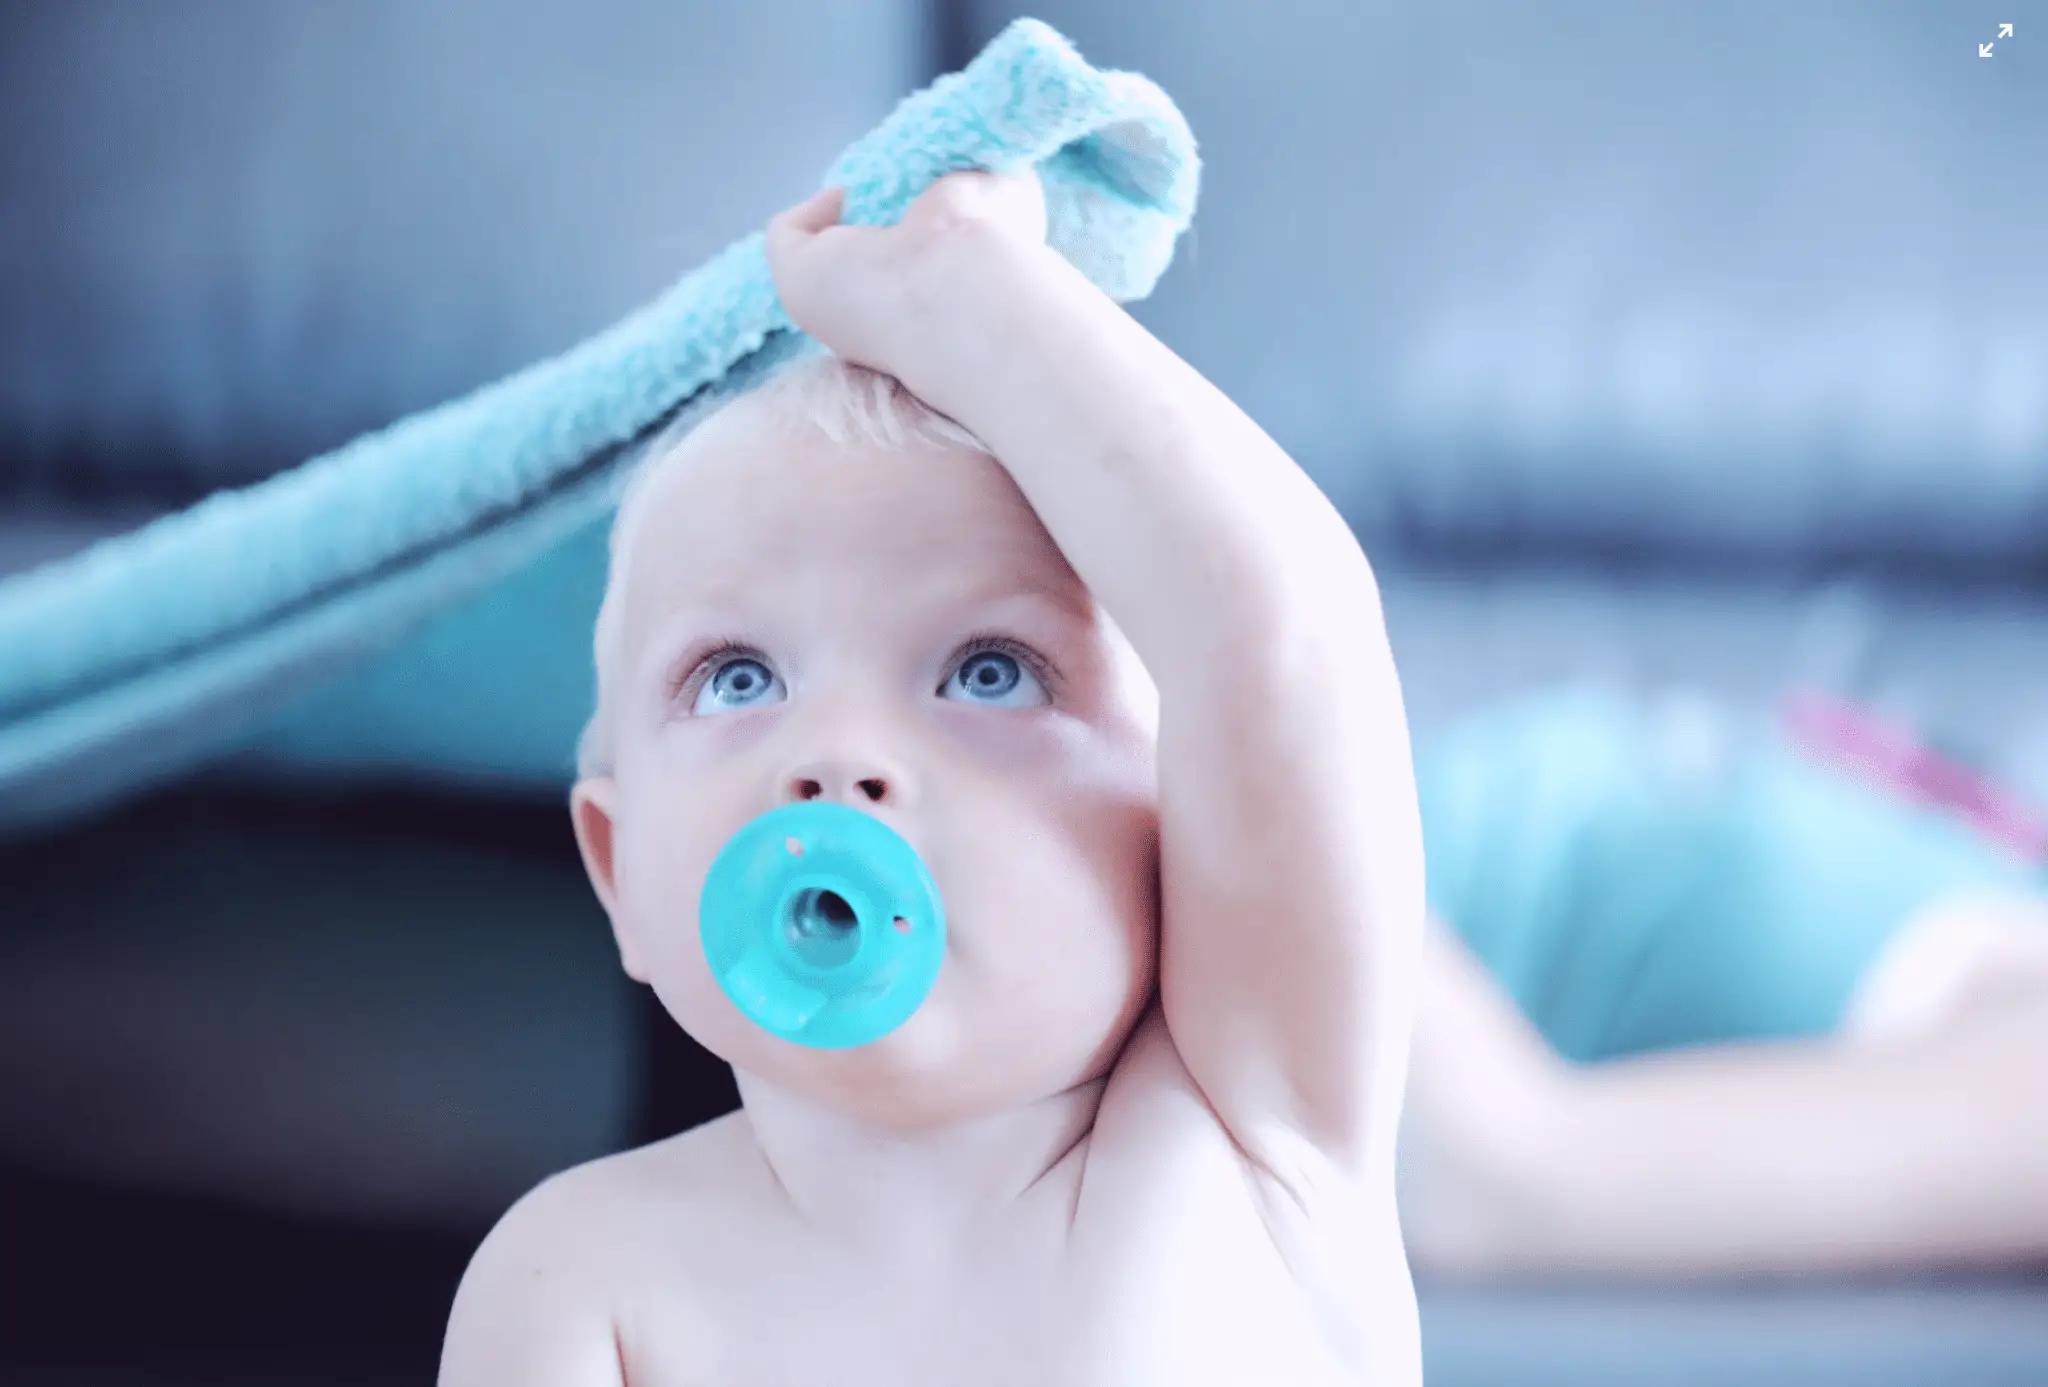 How To Keep A Pacifier From Falling Out